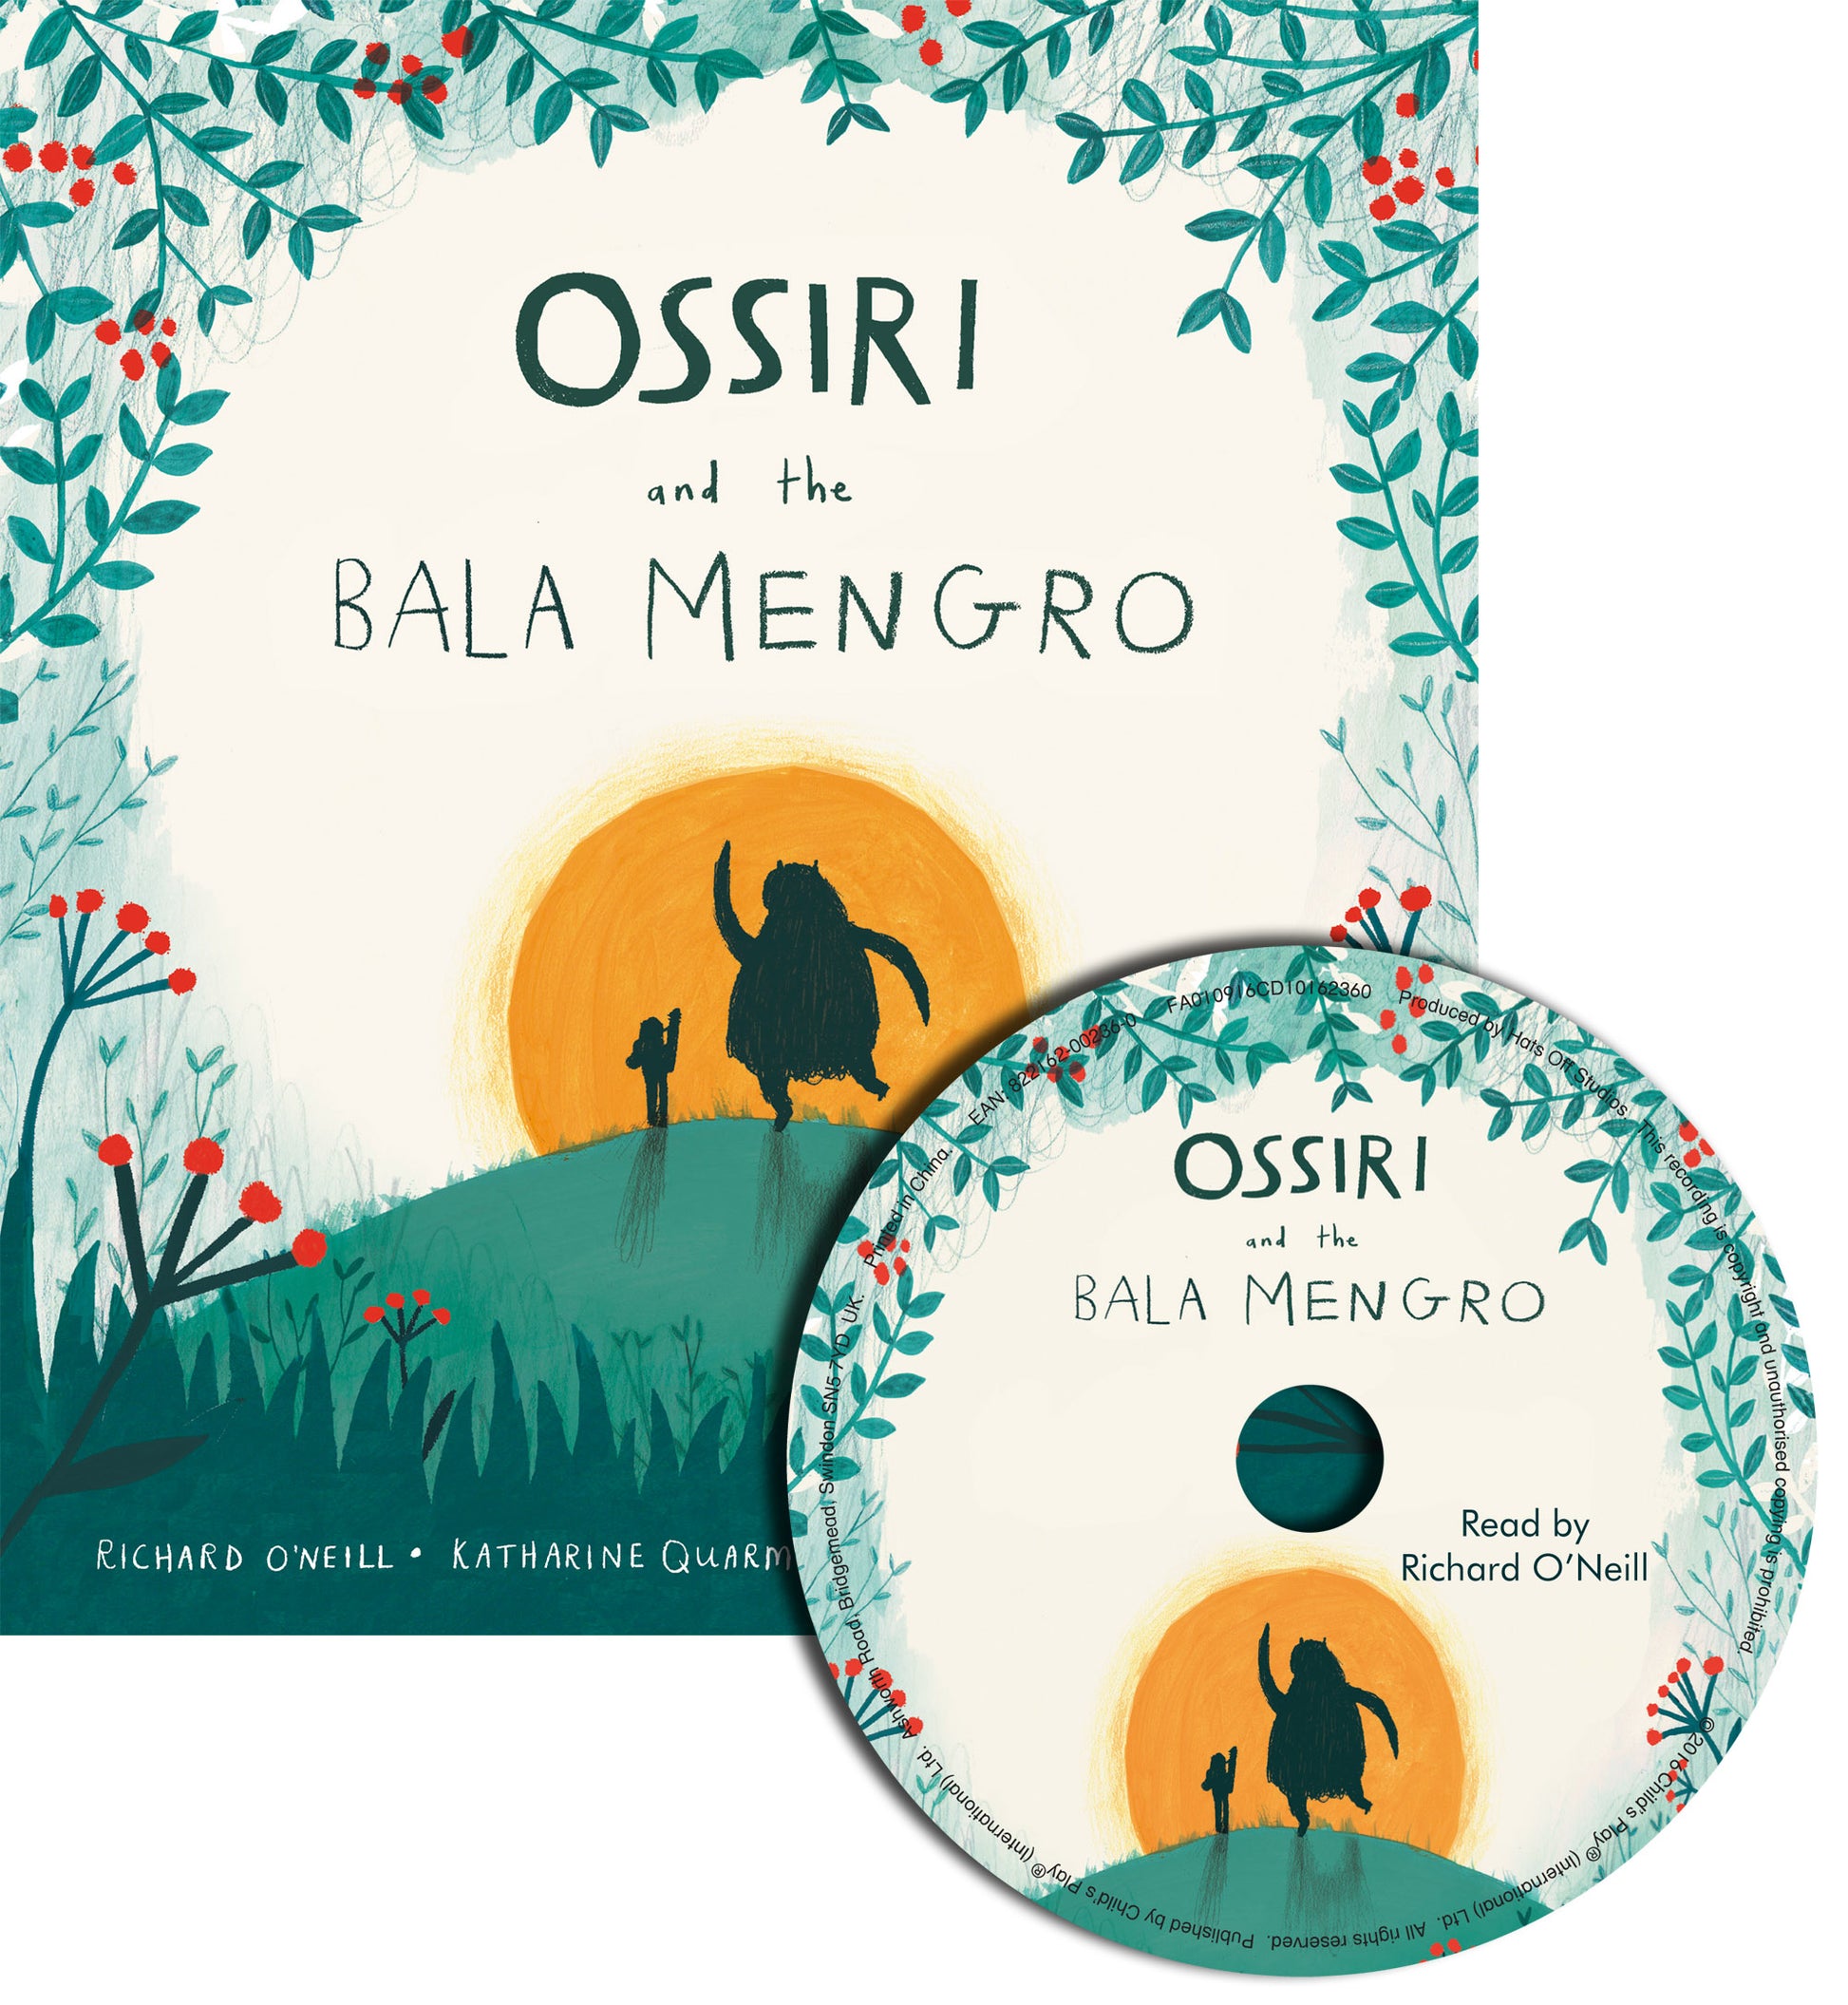 Ossiri and the Bala Mengro (Softcover and CD Edition)